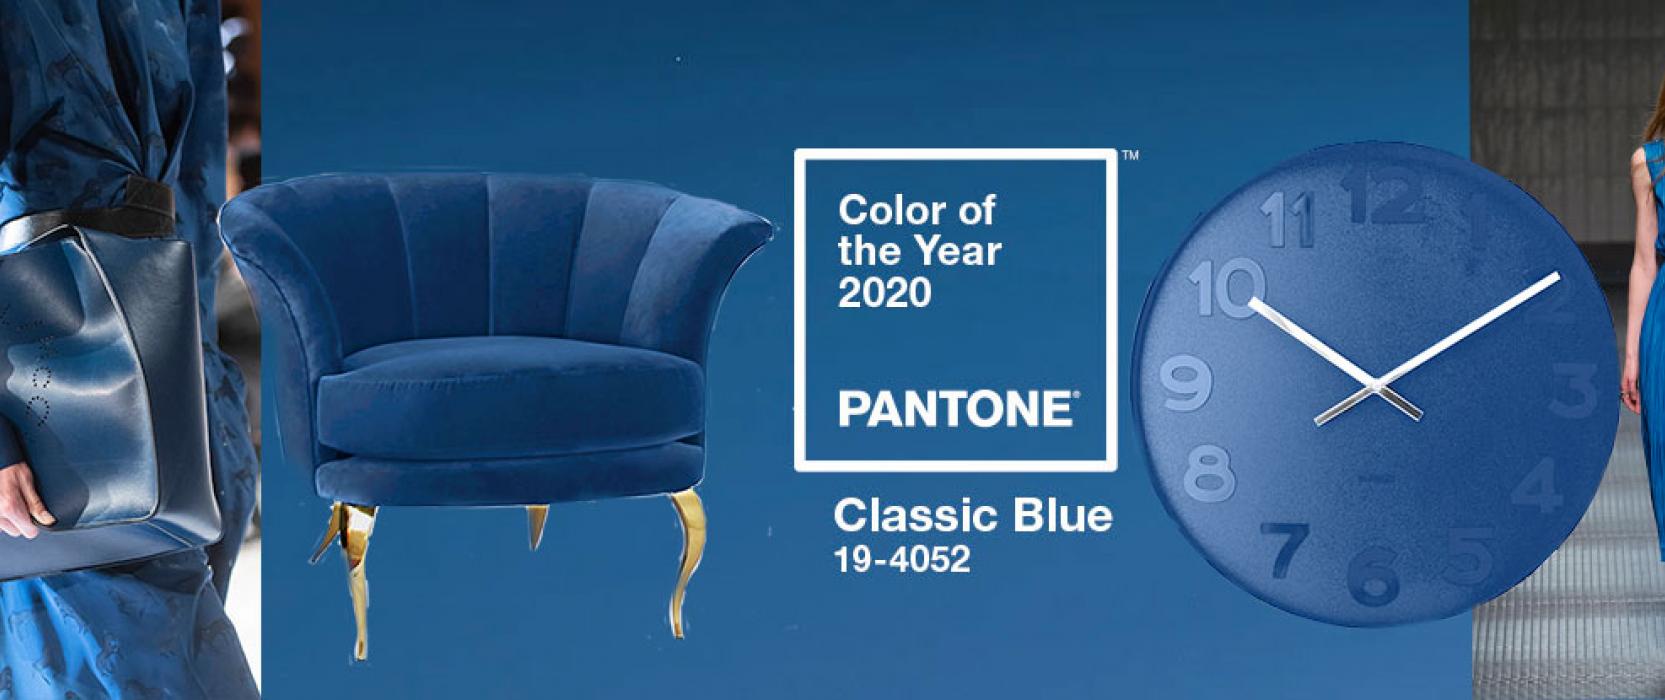 Design applications of Pantone Color of the Year 2020, Classic Blue